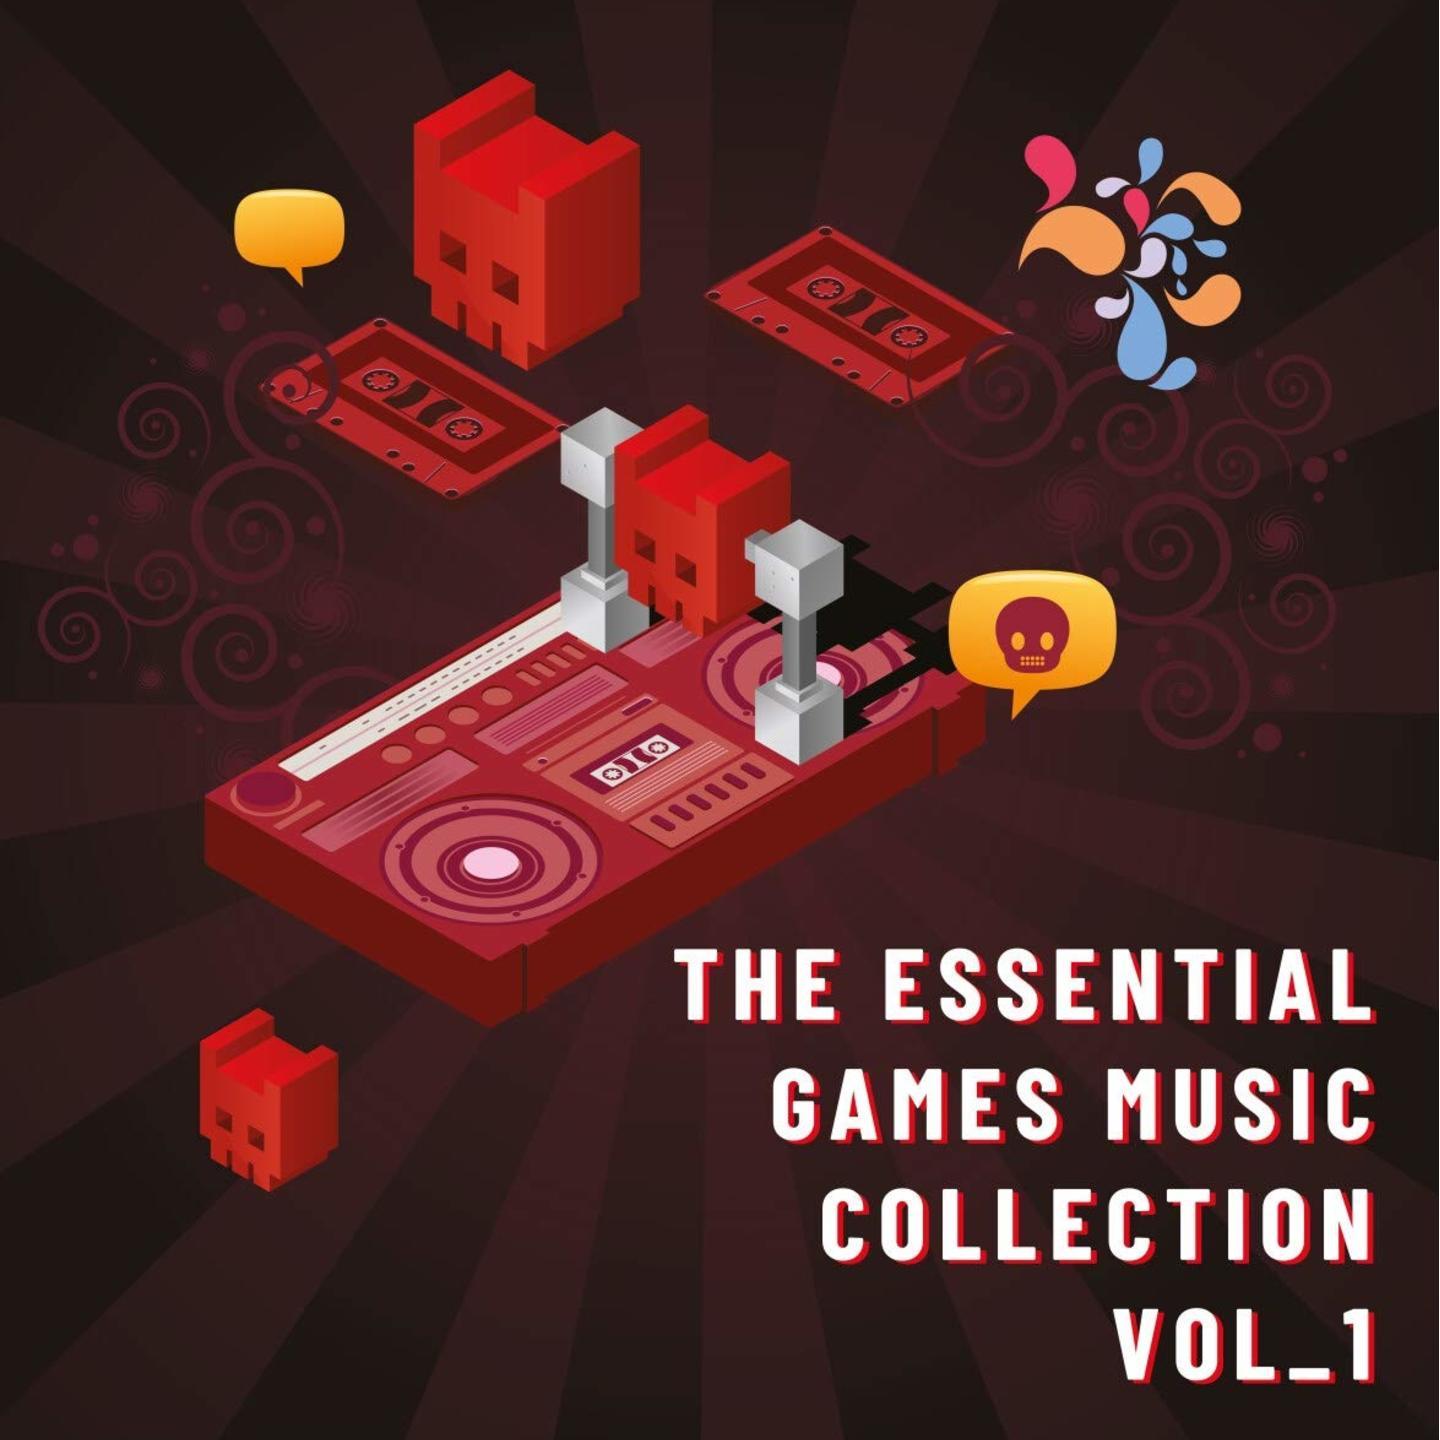 LONDON MUSIC WORKS - The Essential Games Music Collection Volume 1 LP